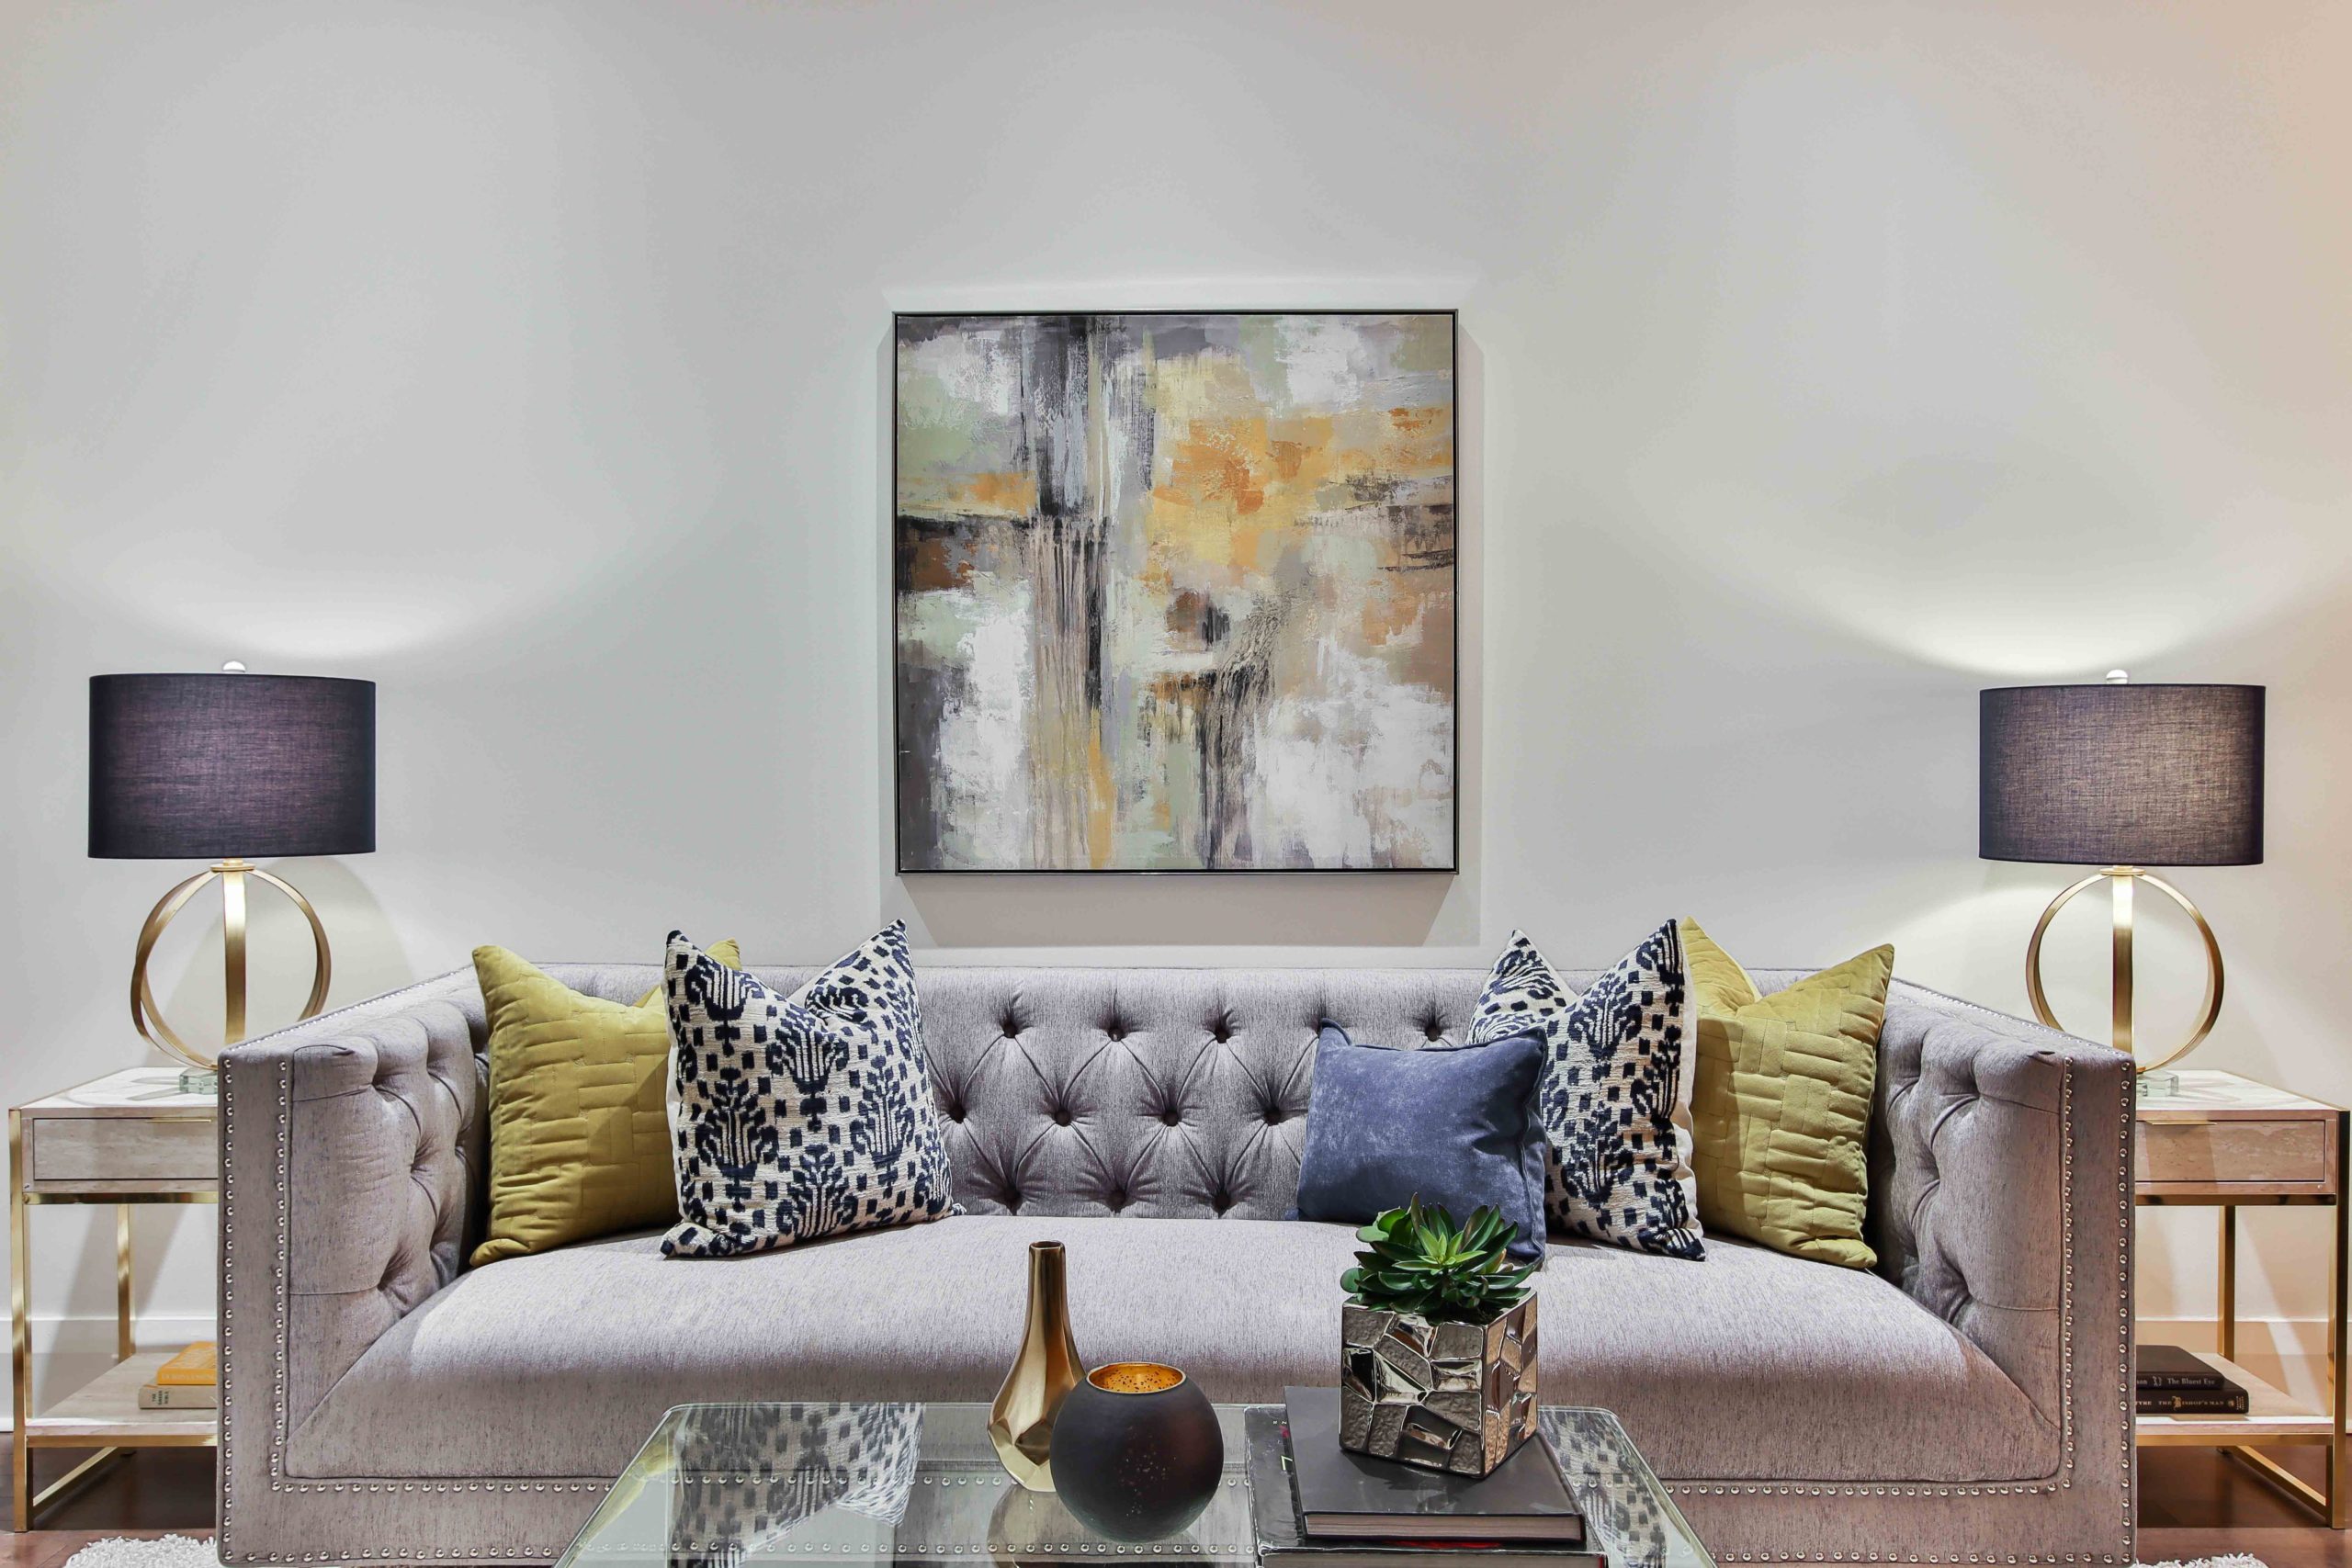 How to Choose Art for Your Living Room - My Daily Magazine - Art